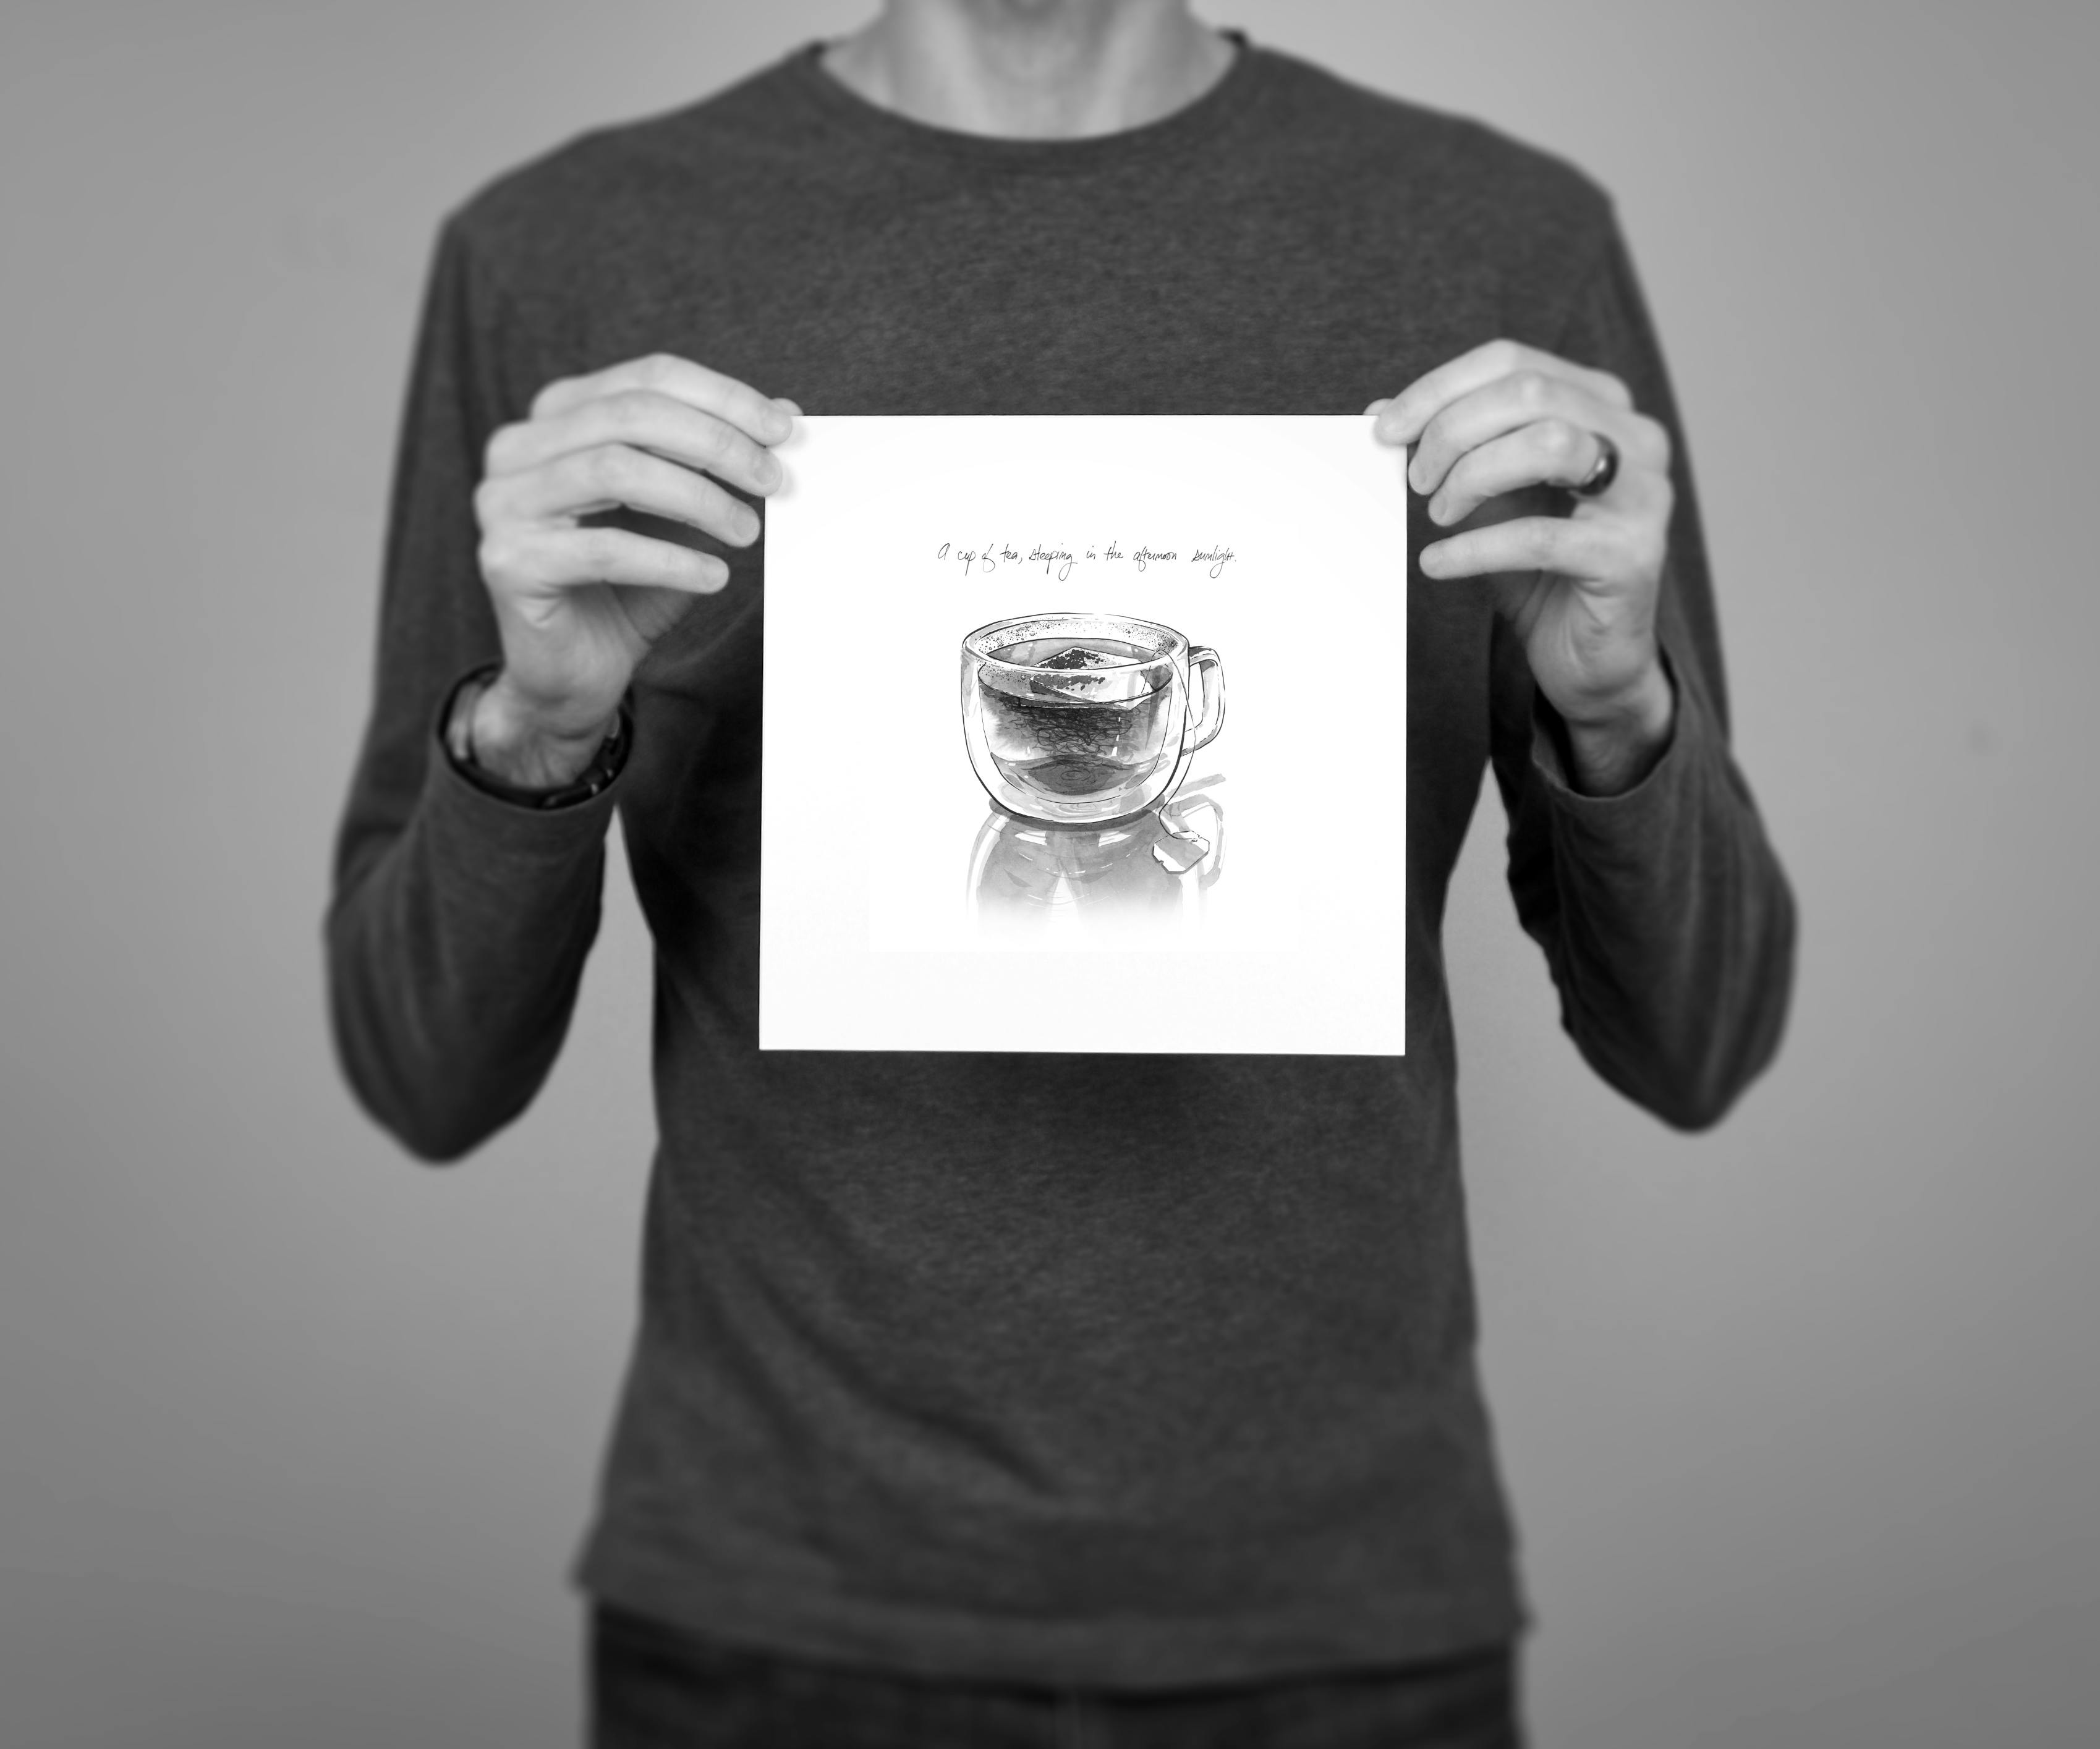 6 x 6” giclée print of “A cup of tea”, an ink wash drawing